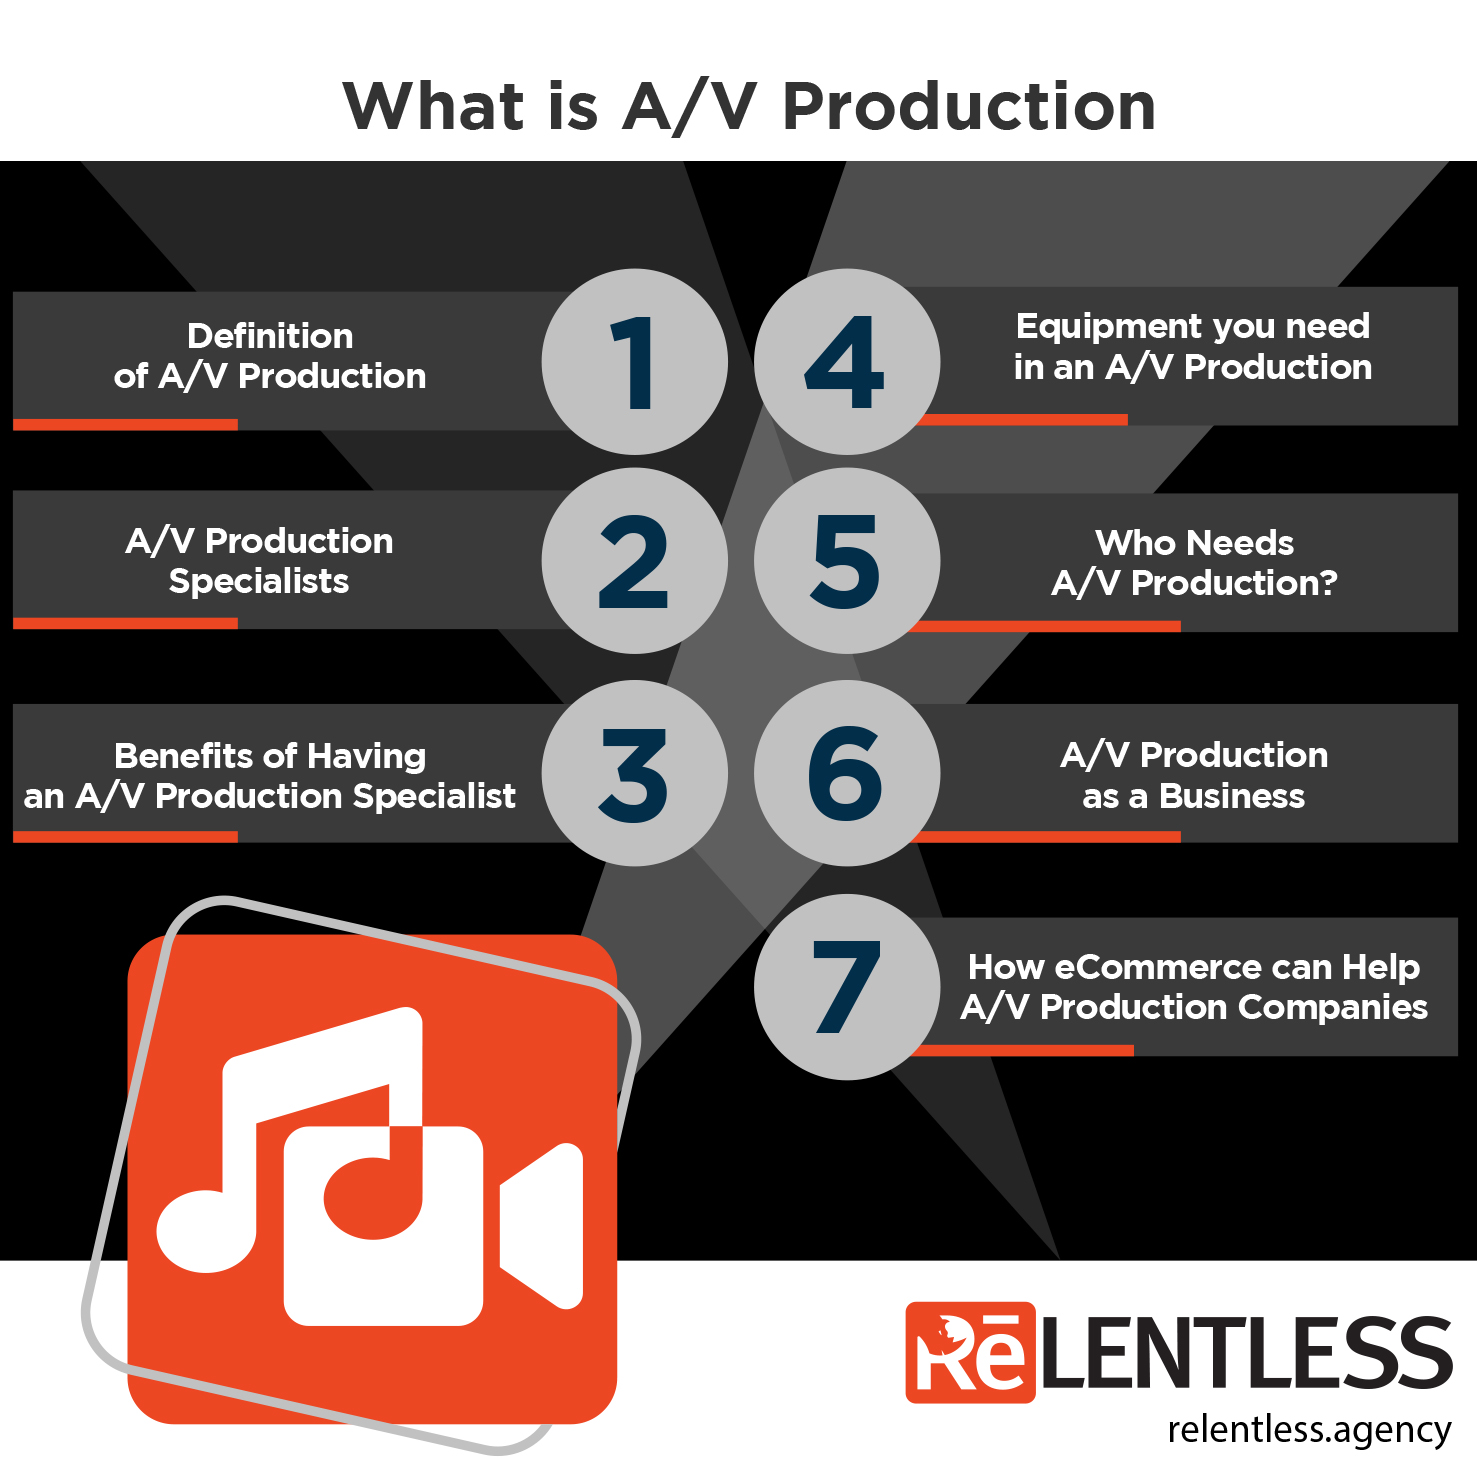 What is A/V Production?